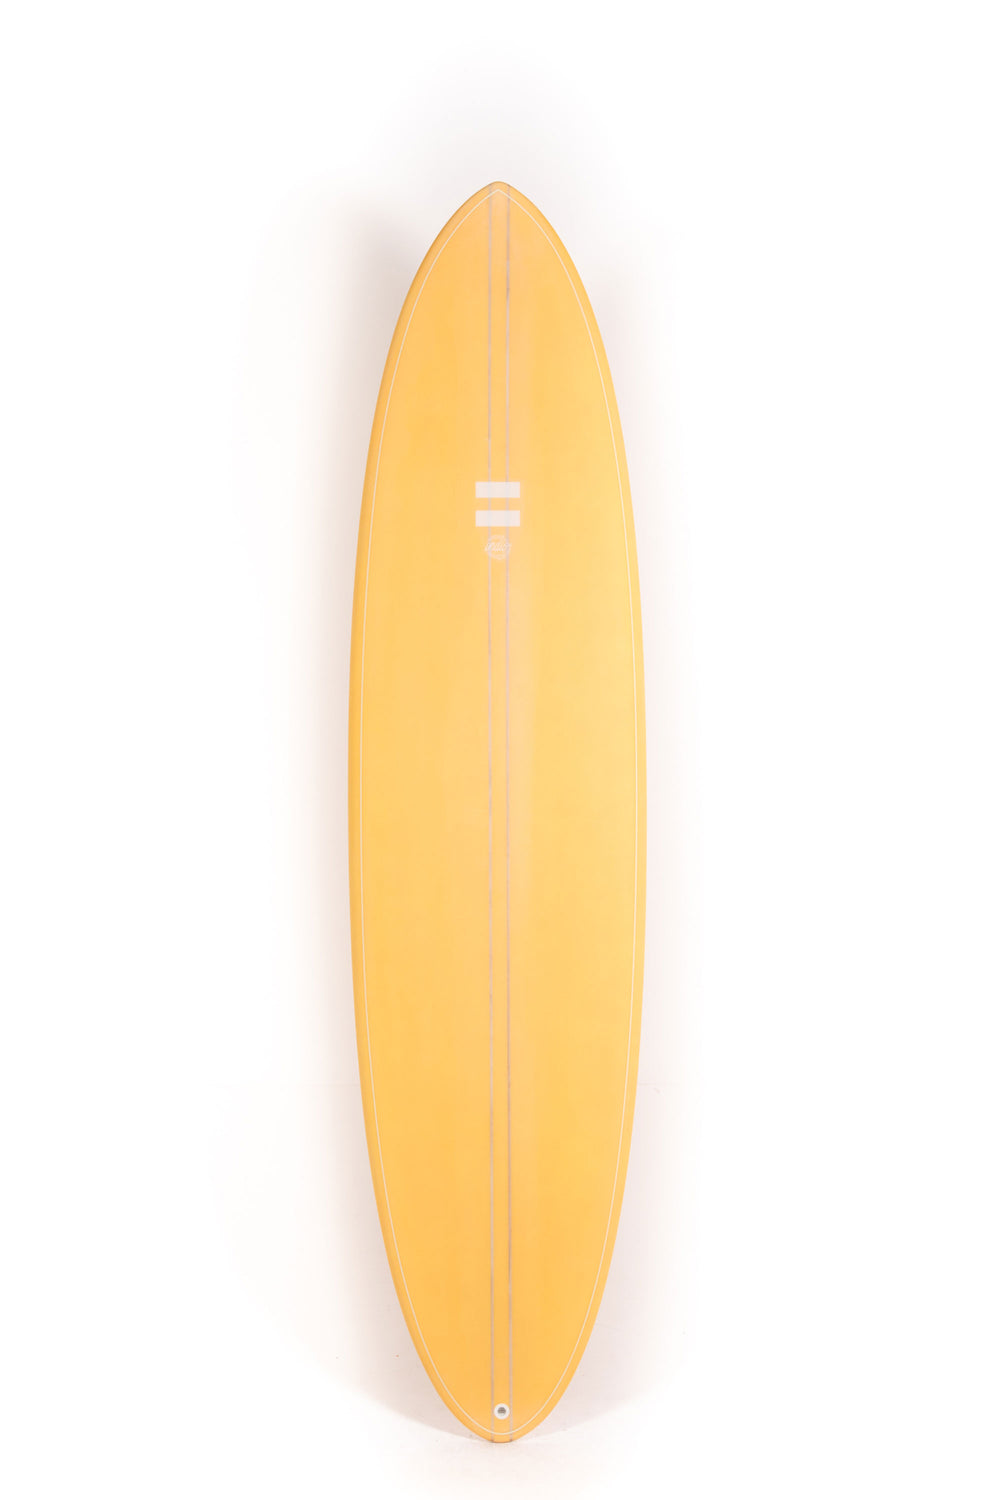 Indio Surfboards - THE EGG Toasted - 7'10